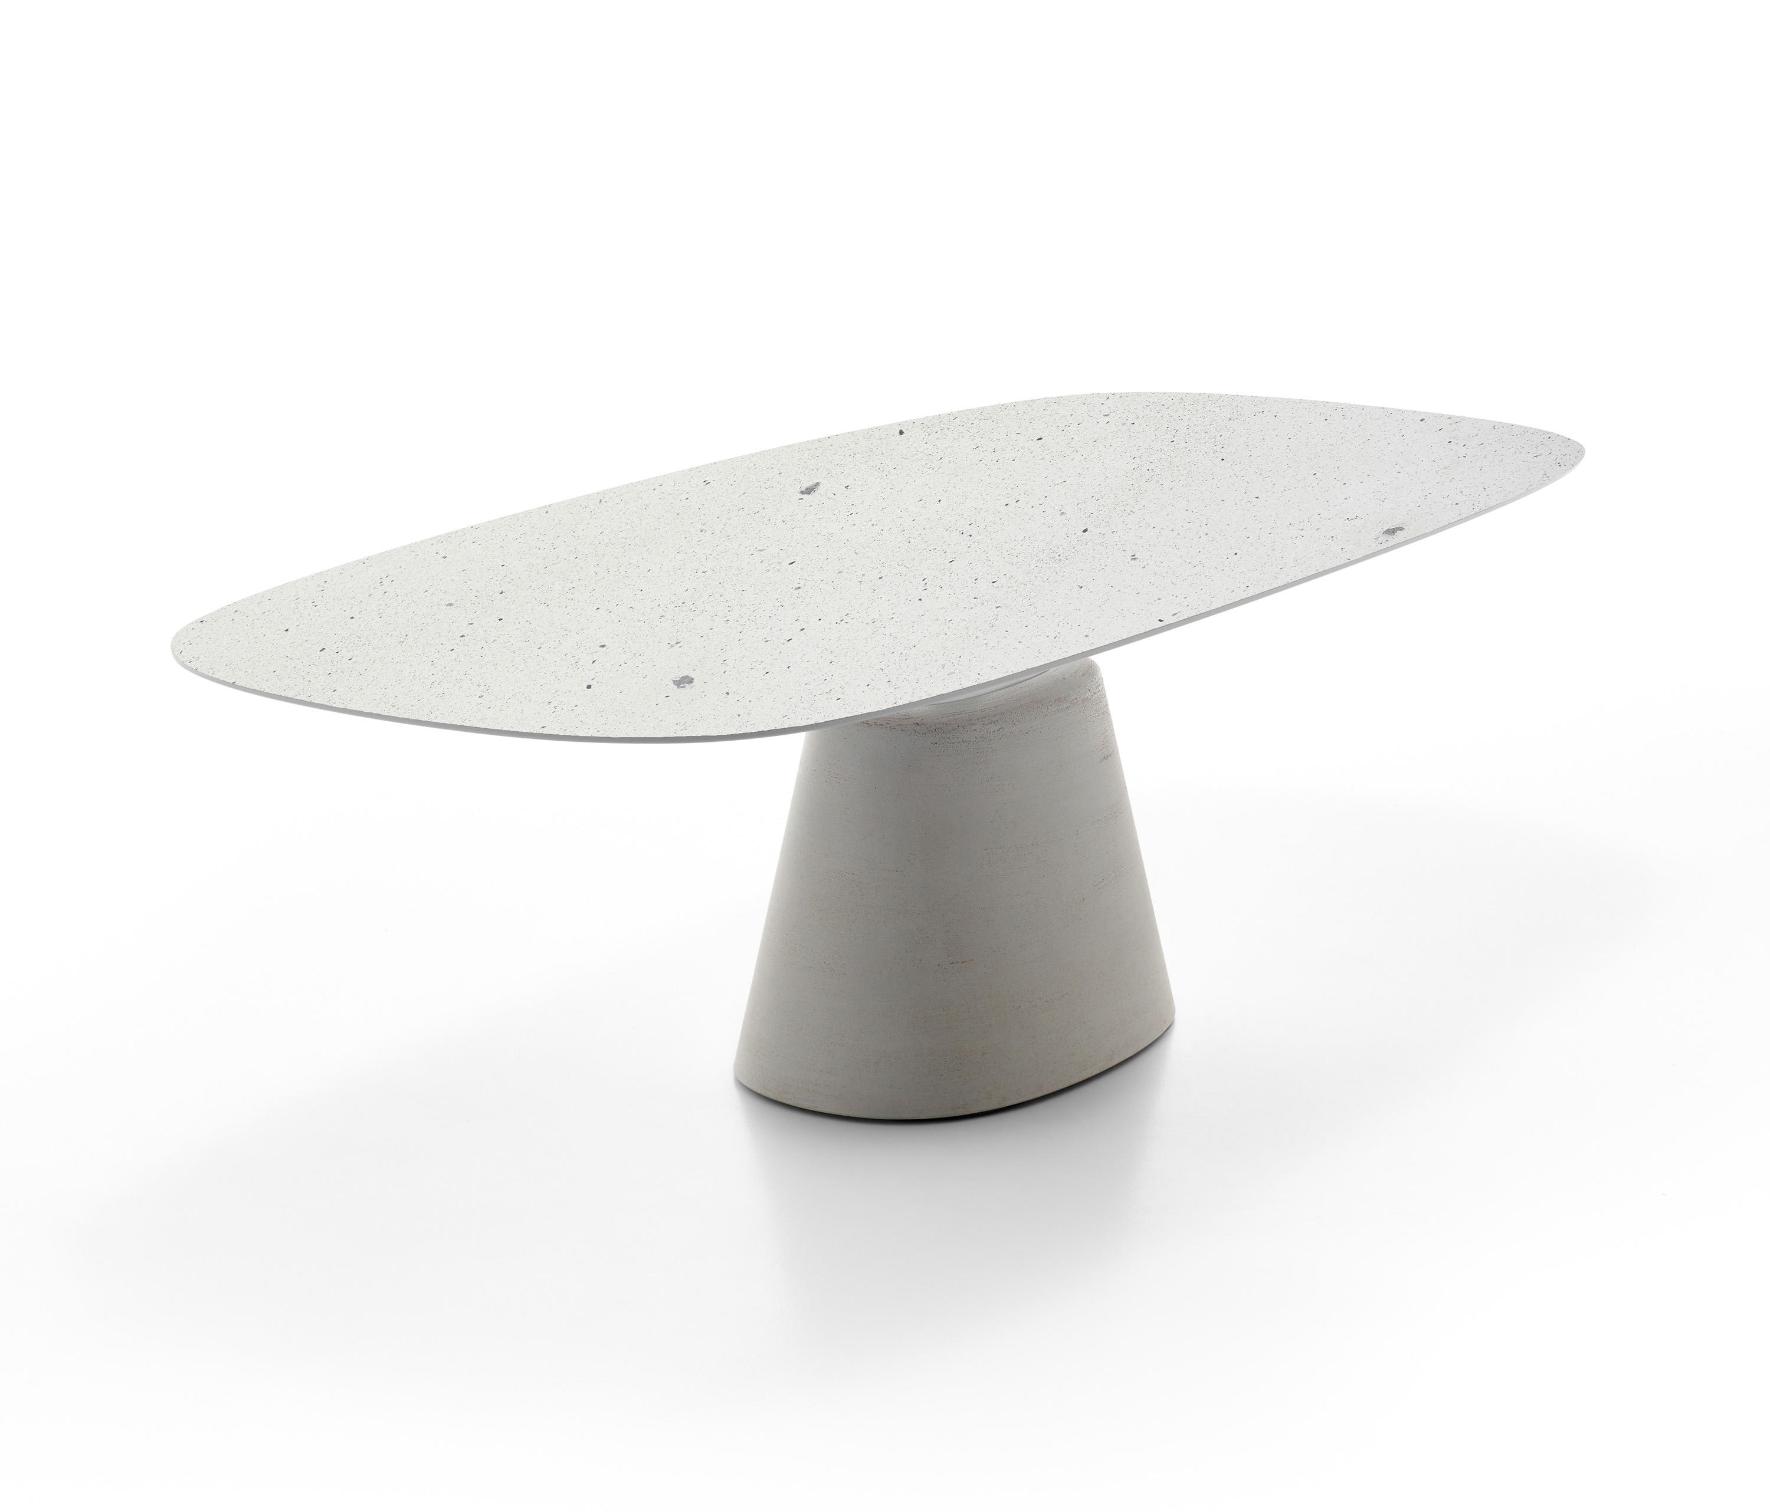 Rock Maxi Italian Indoor / Outdoor Table ☞ Structure: Cement Natural X080 ☞ Top: Matt Lacquered - White X042 ☞ Dimensions: 115 x 240 cm